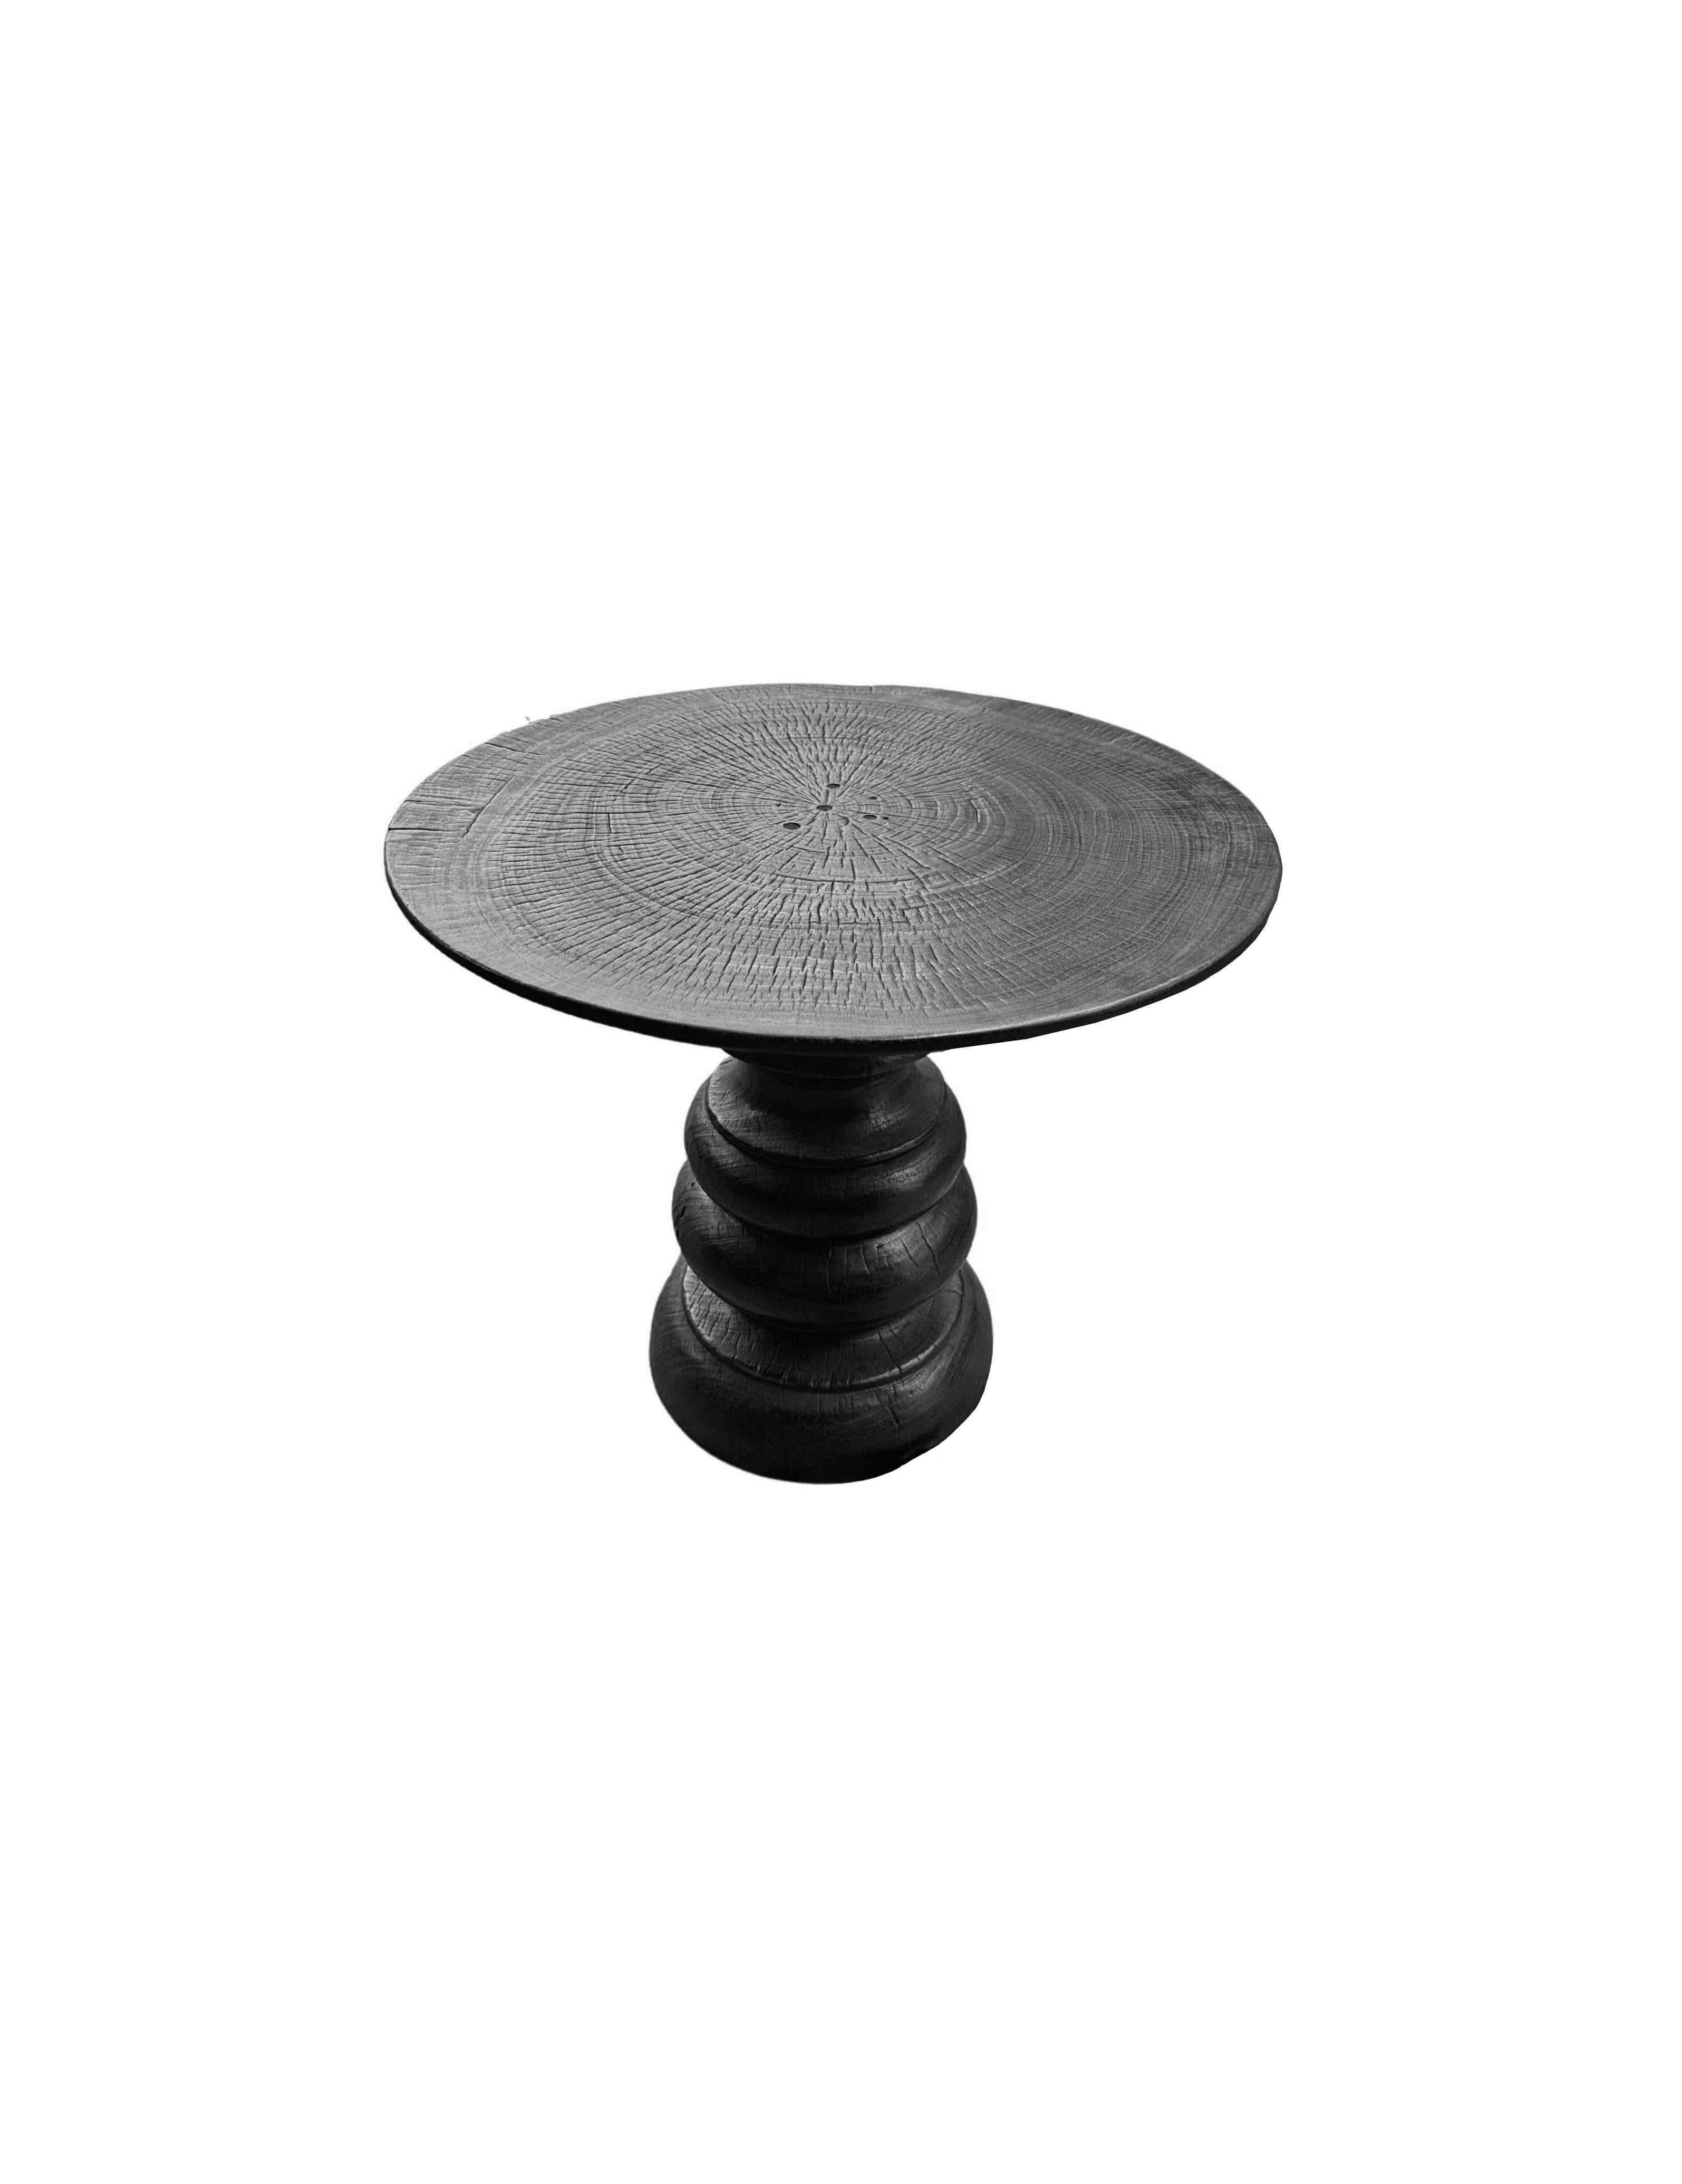 A wonderfully organic round side table. Its rich black pigment was achieved through burning the wood three times. Its neutral pigment and subtle wood texture makes it perfect for any space. A uniquely sculptural and versatile piece, featuring carved